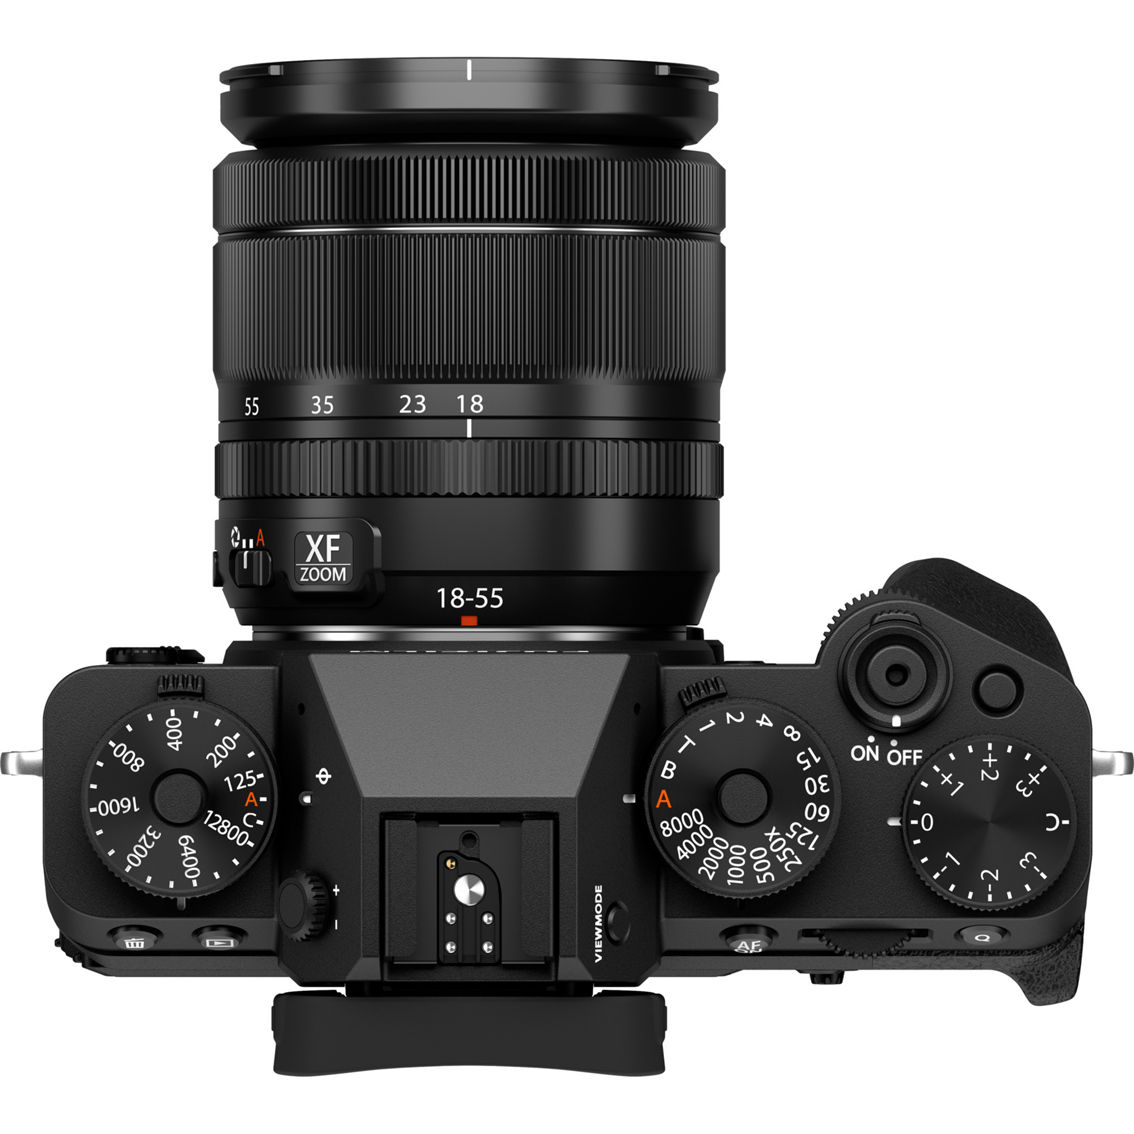 Fujifilm XT5 Mirrorless Camera Body and Black XF 18 to 55mm F2.8-4 R LM OIS Lens - Image 4 of 4